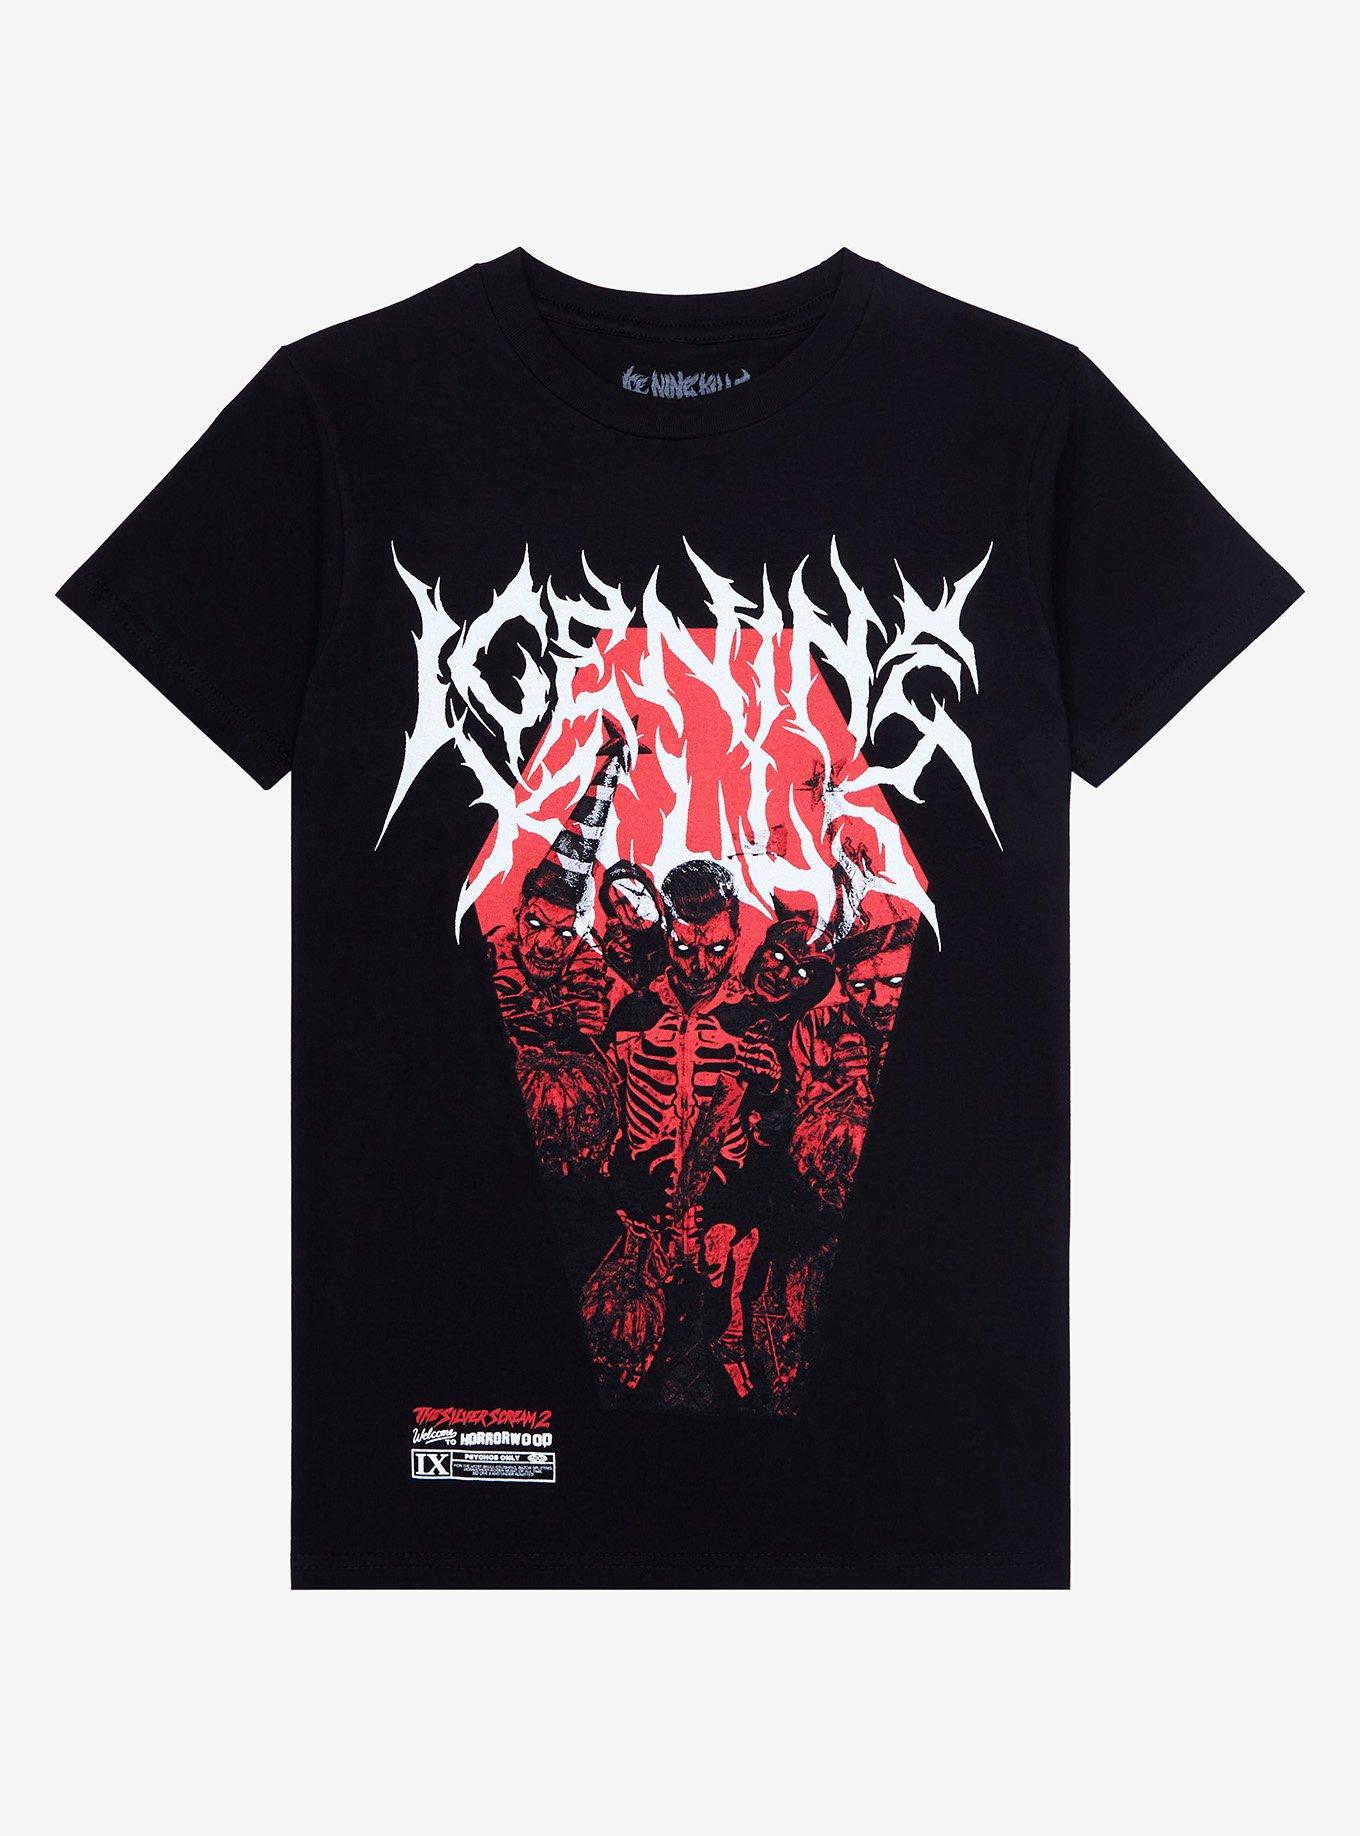 Ice Nine Kills Welcome To Horrorwood: The Silver Scream 2 T-Shirt | Hot ...